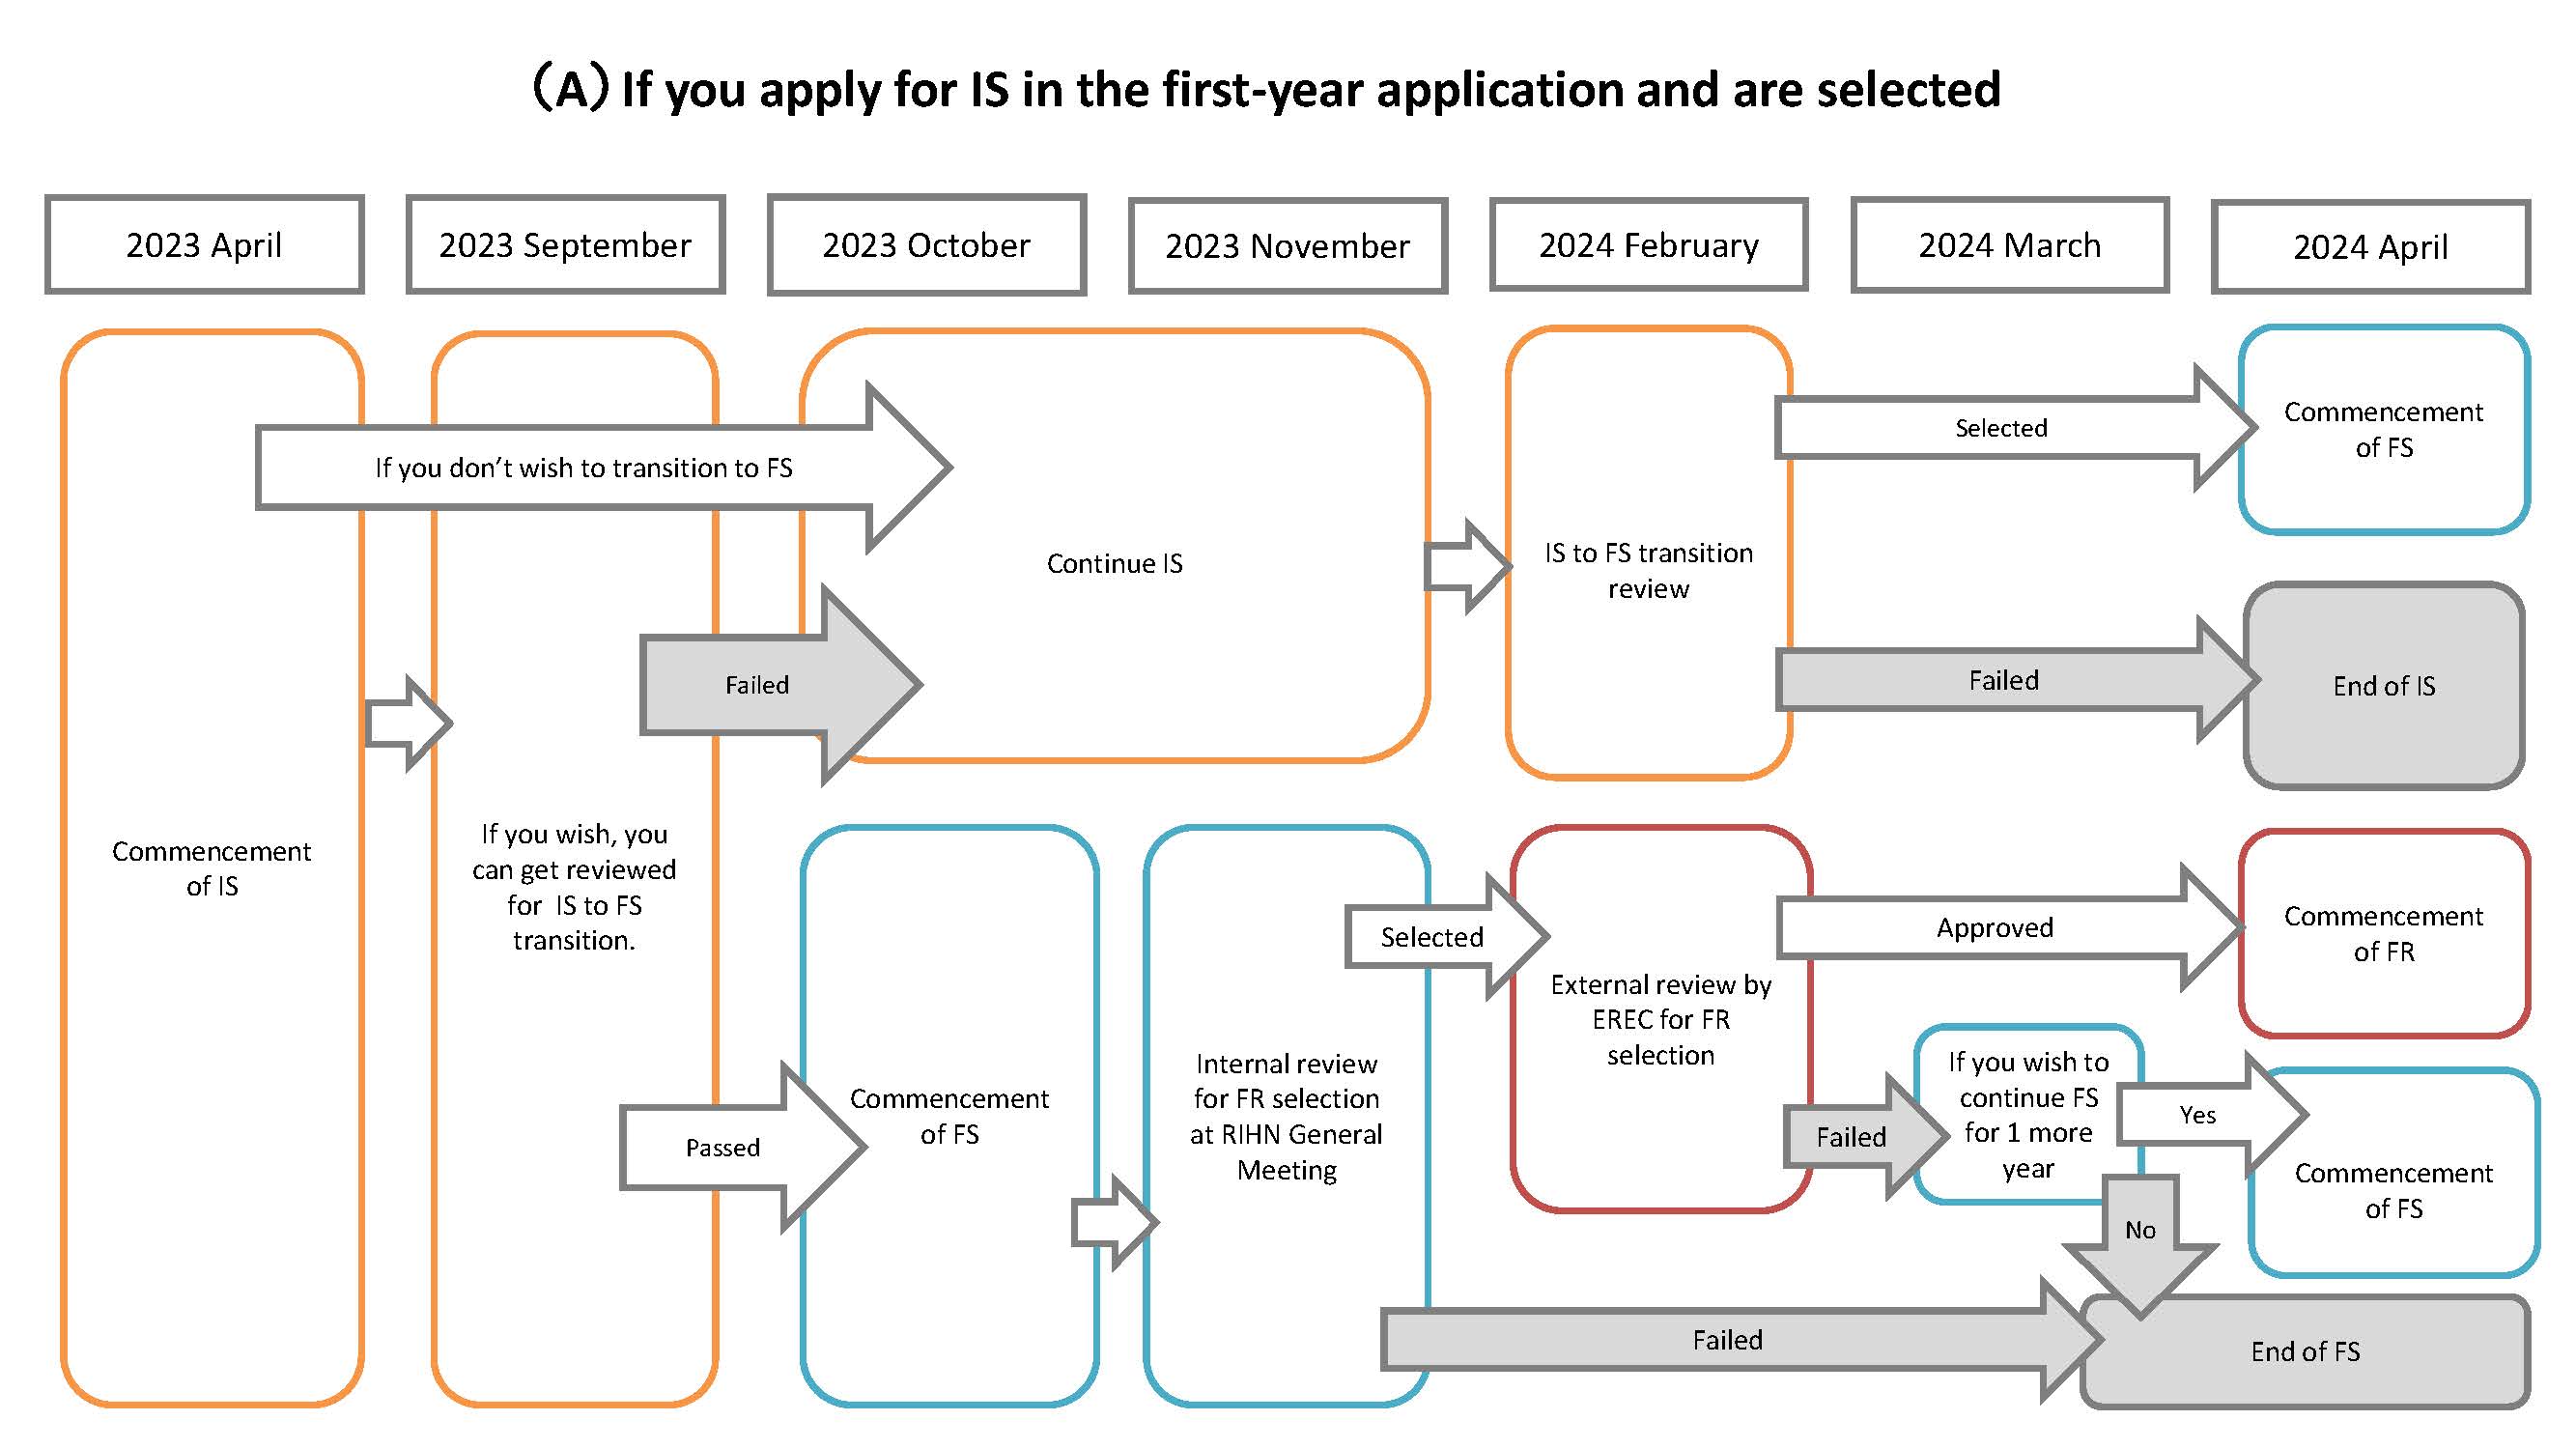 If you apply for IS in the first-year application and are selected